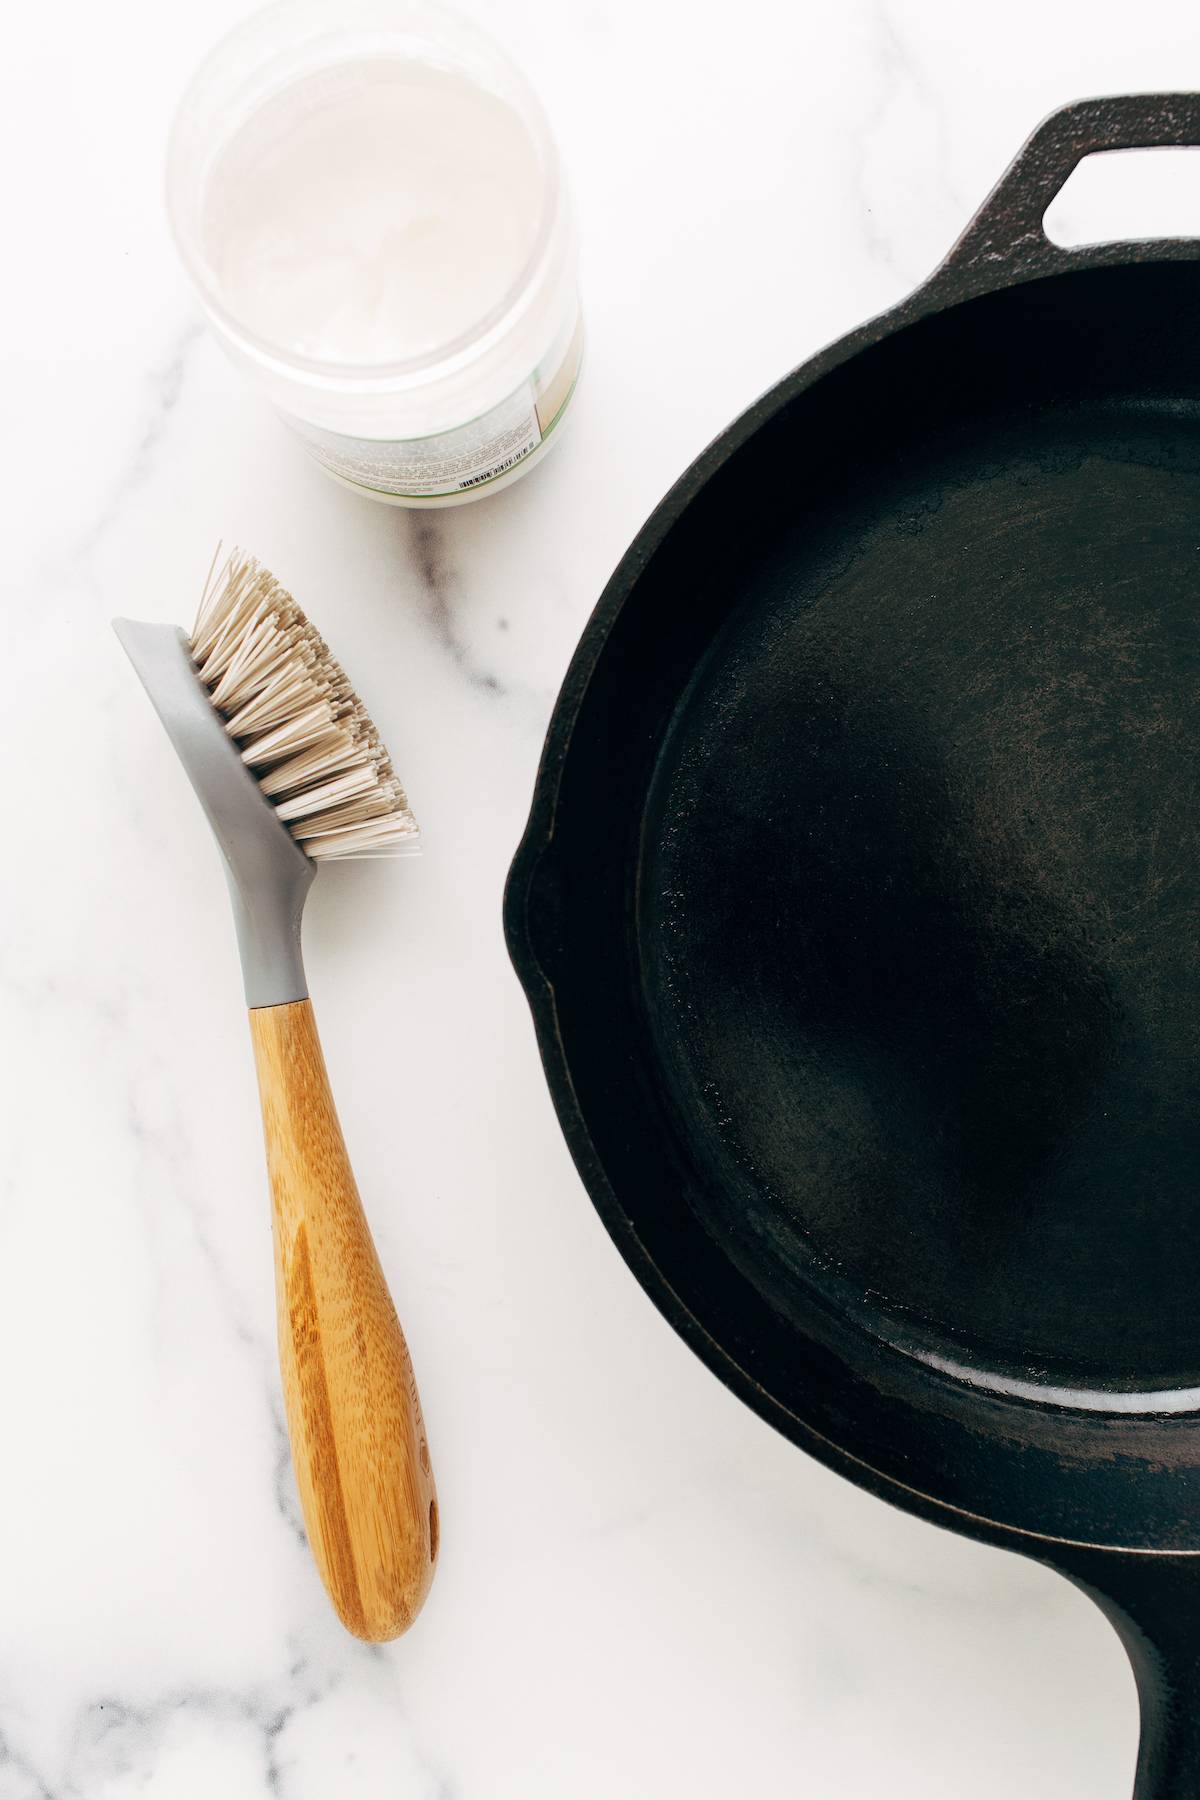 Cast iron skillet with brush and coconut oil.